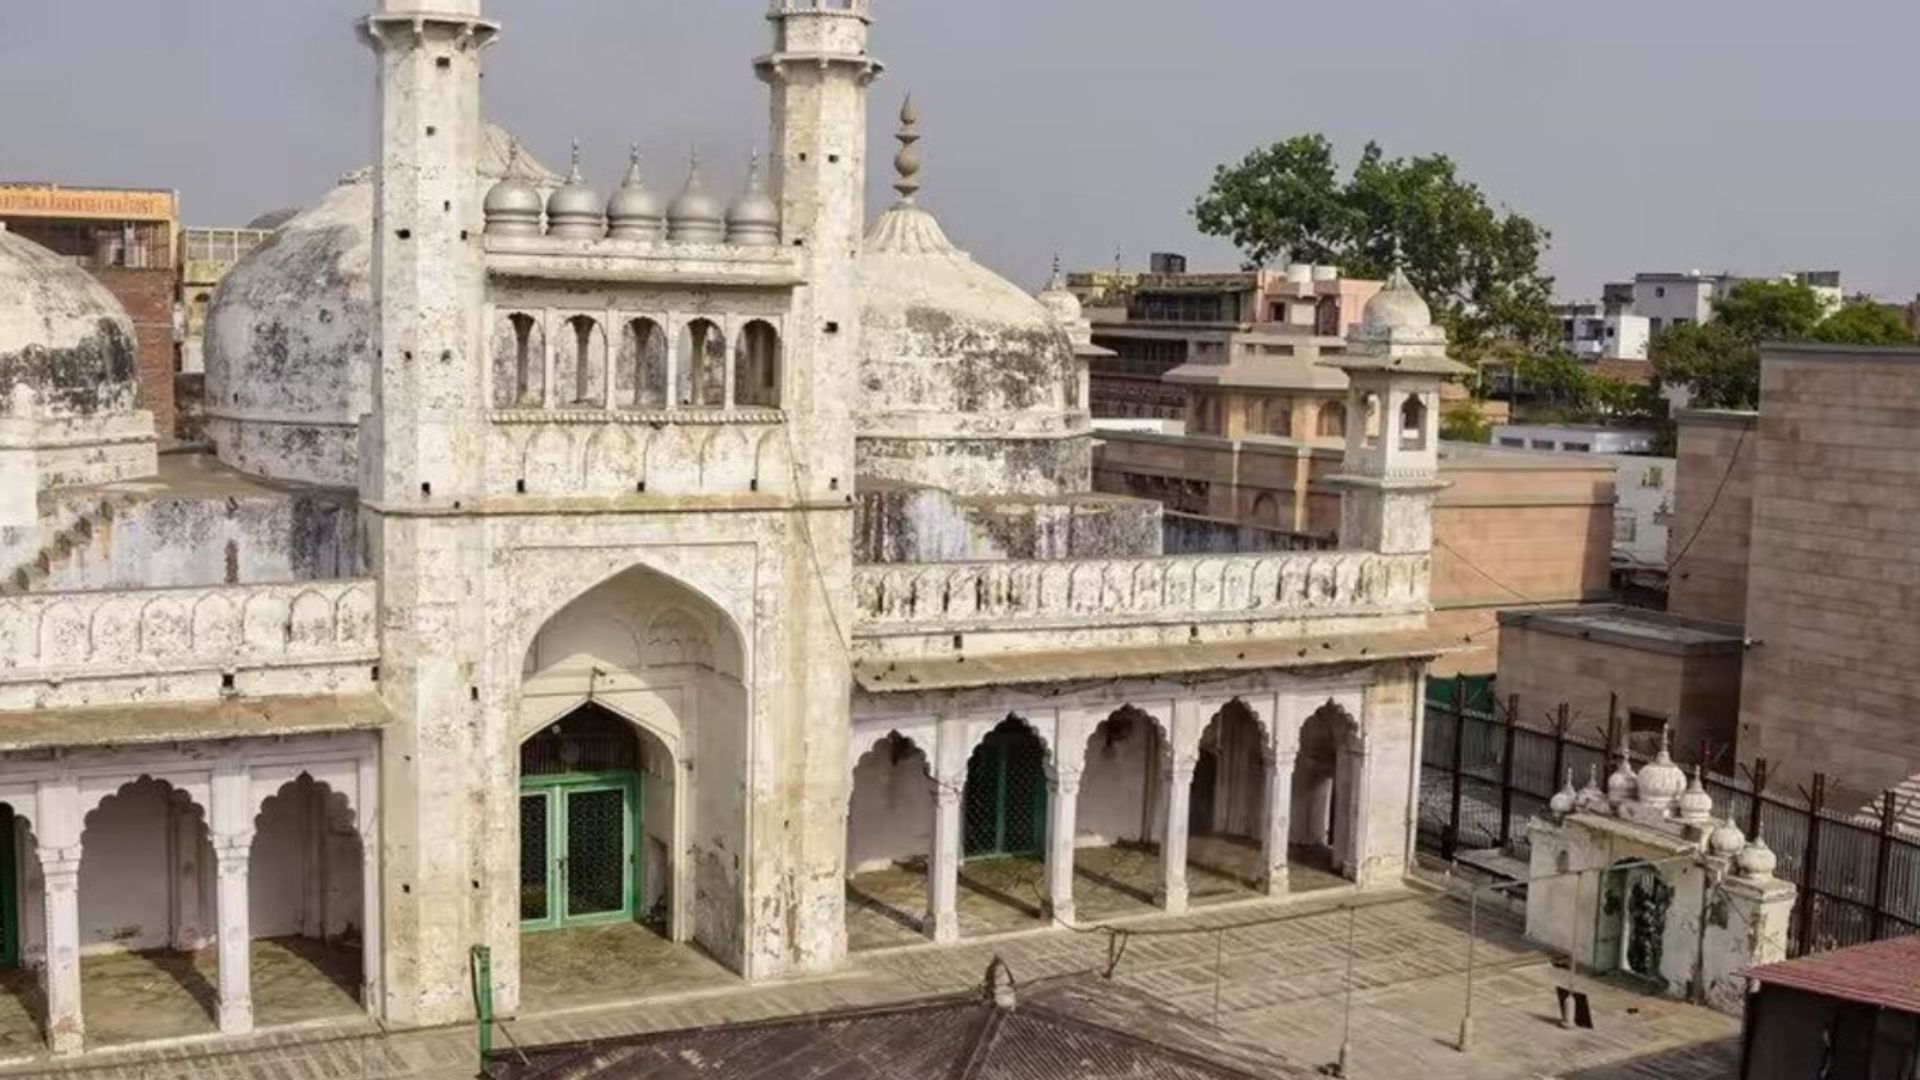 Heavy security deployed around Gyanvapi mosque complex in Varanasi after district court’s decision